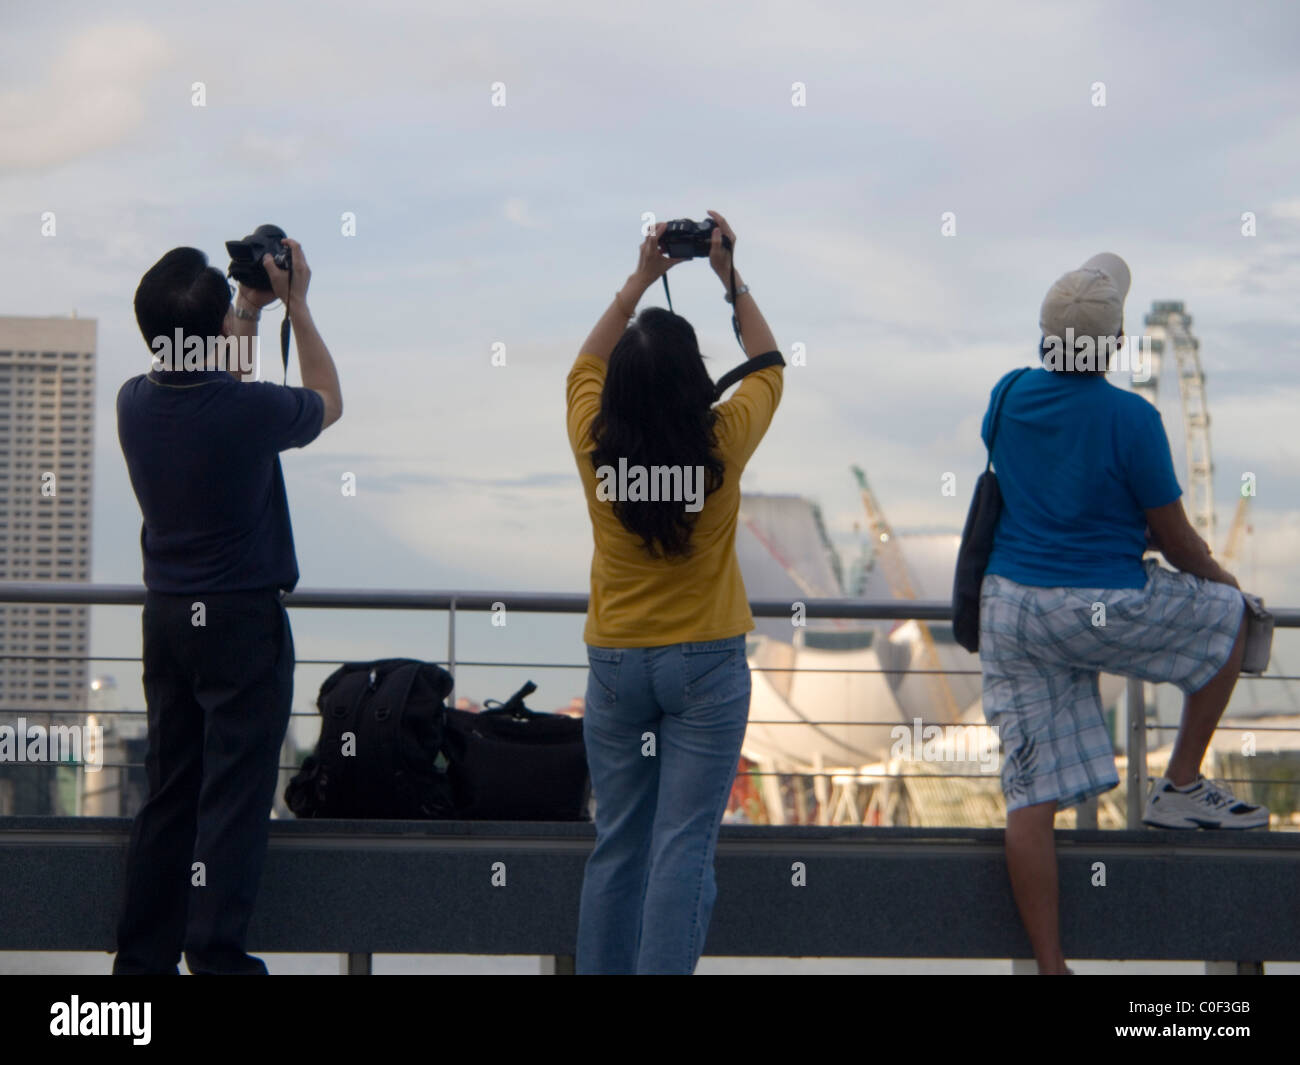 Singaporeans watch/photograph rehearsal for independence day festival Stock Photo